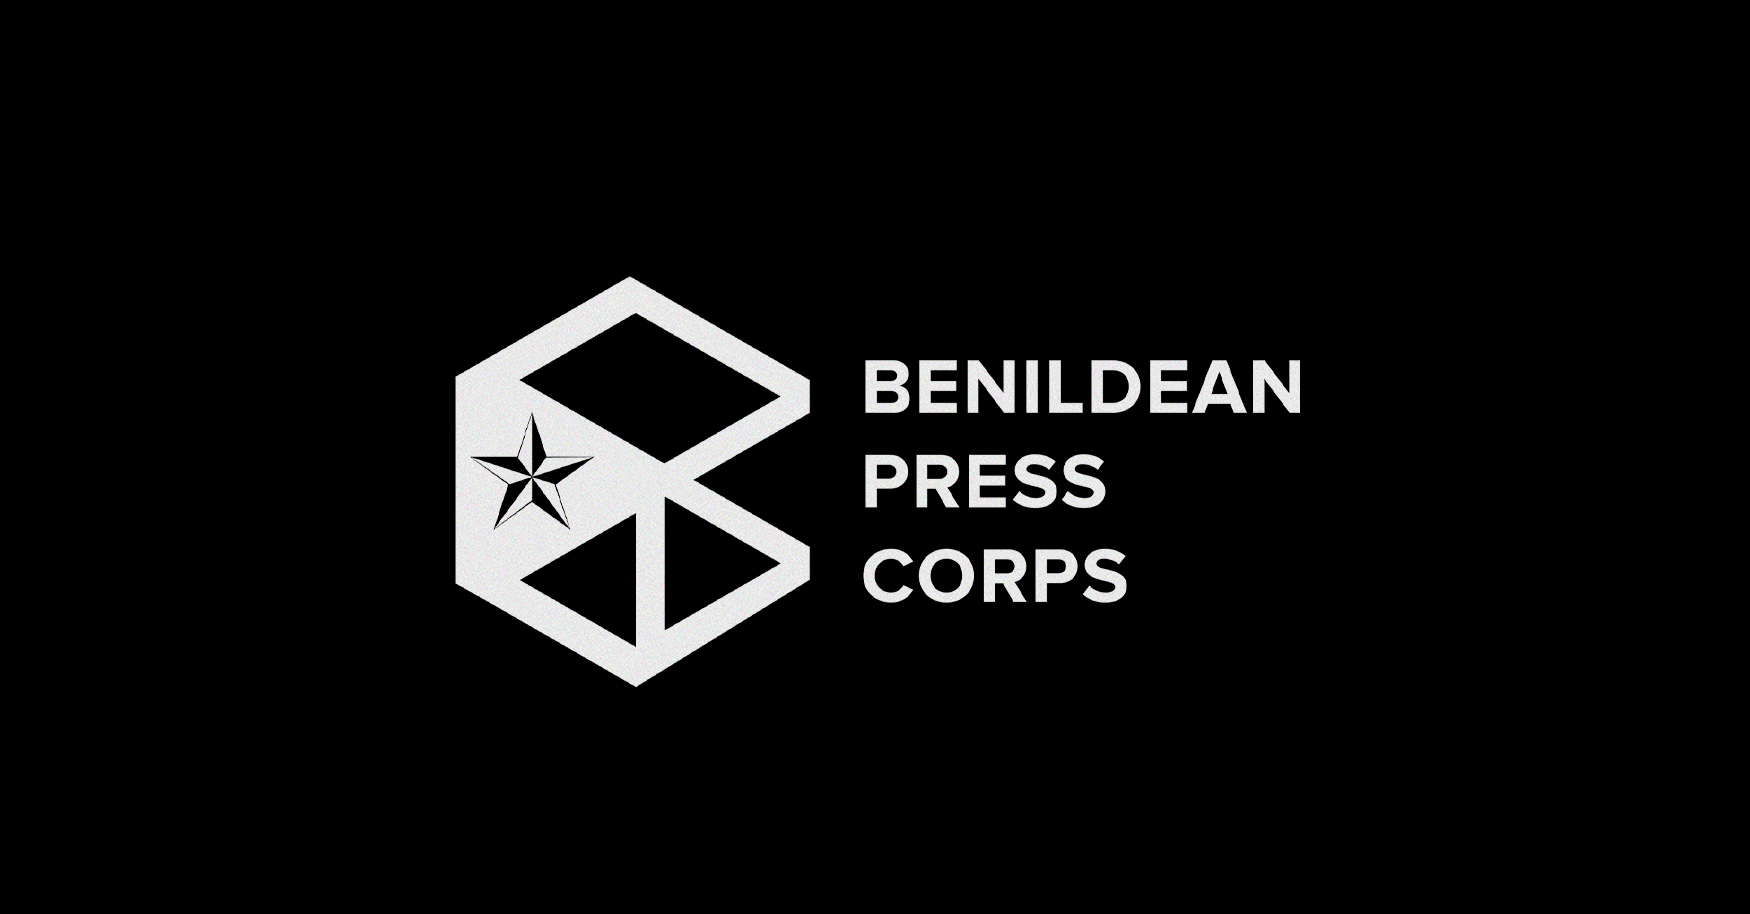 Cover Photo By The Benildean Press Corps